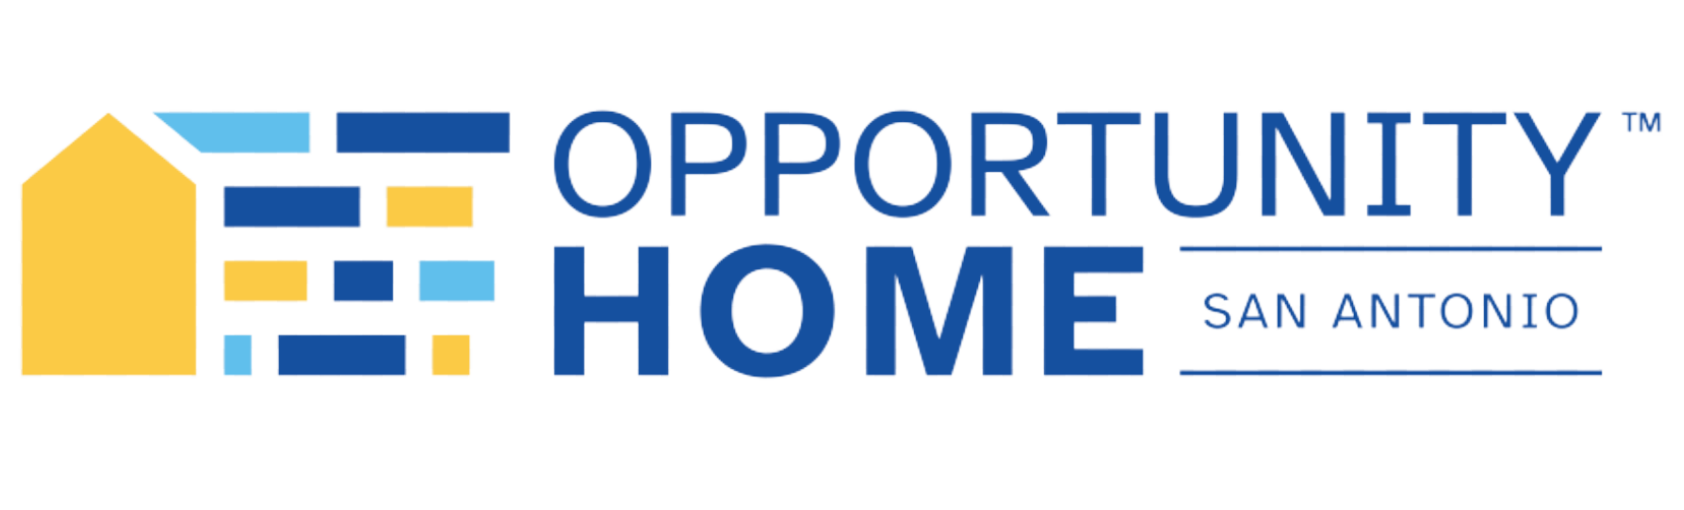 opportunity home banner